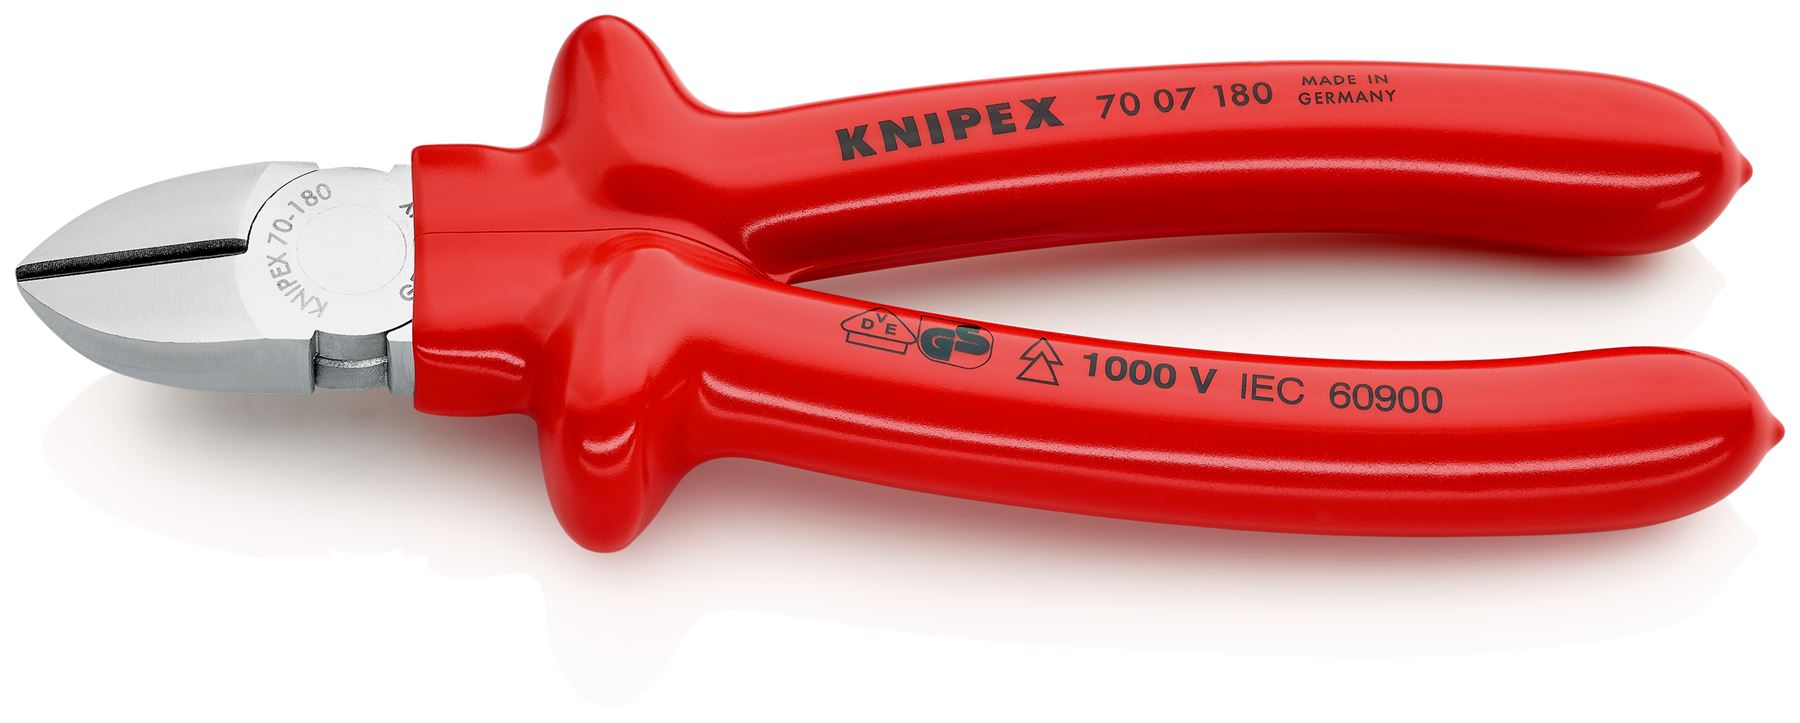 KNIPEX Diagonal Cutting Pliers Side Cutters 180mm VDE Dipped Insulation Grips 70 07 180